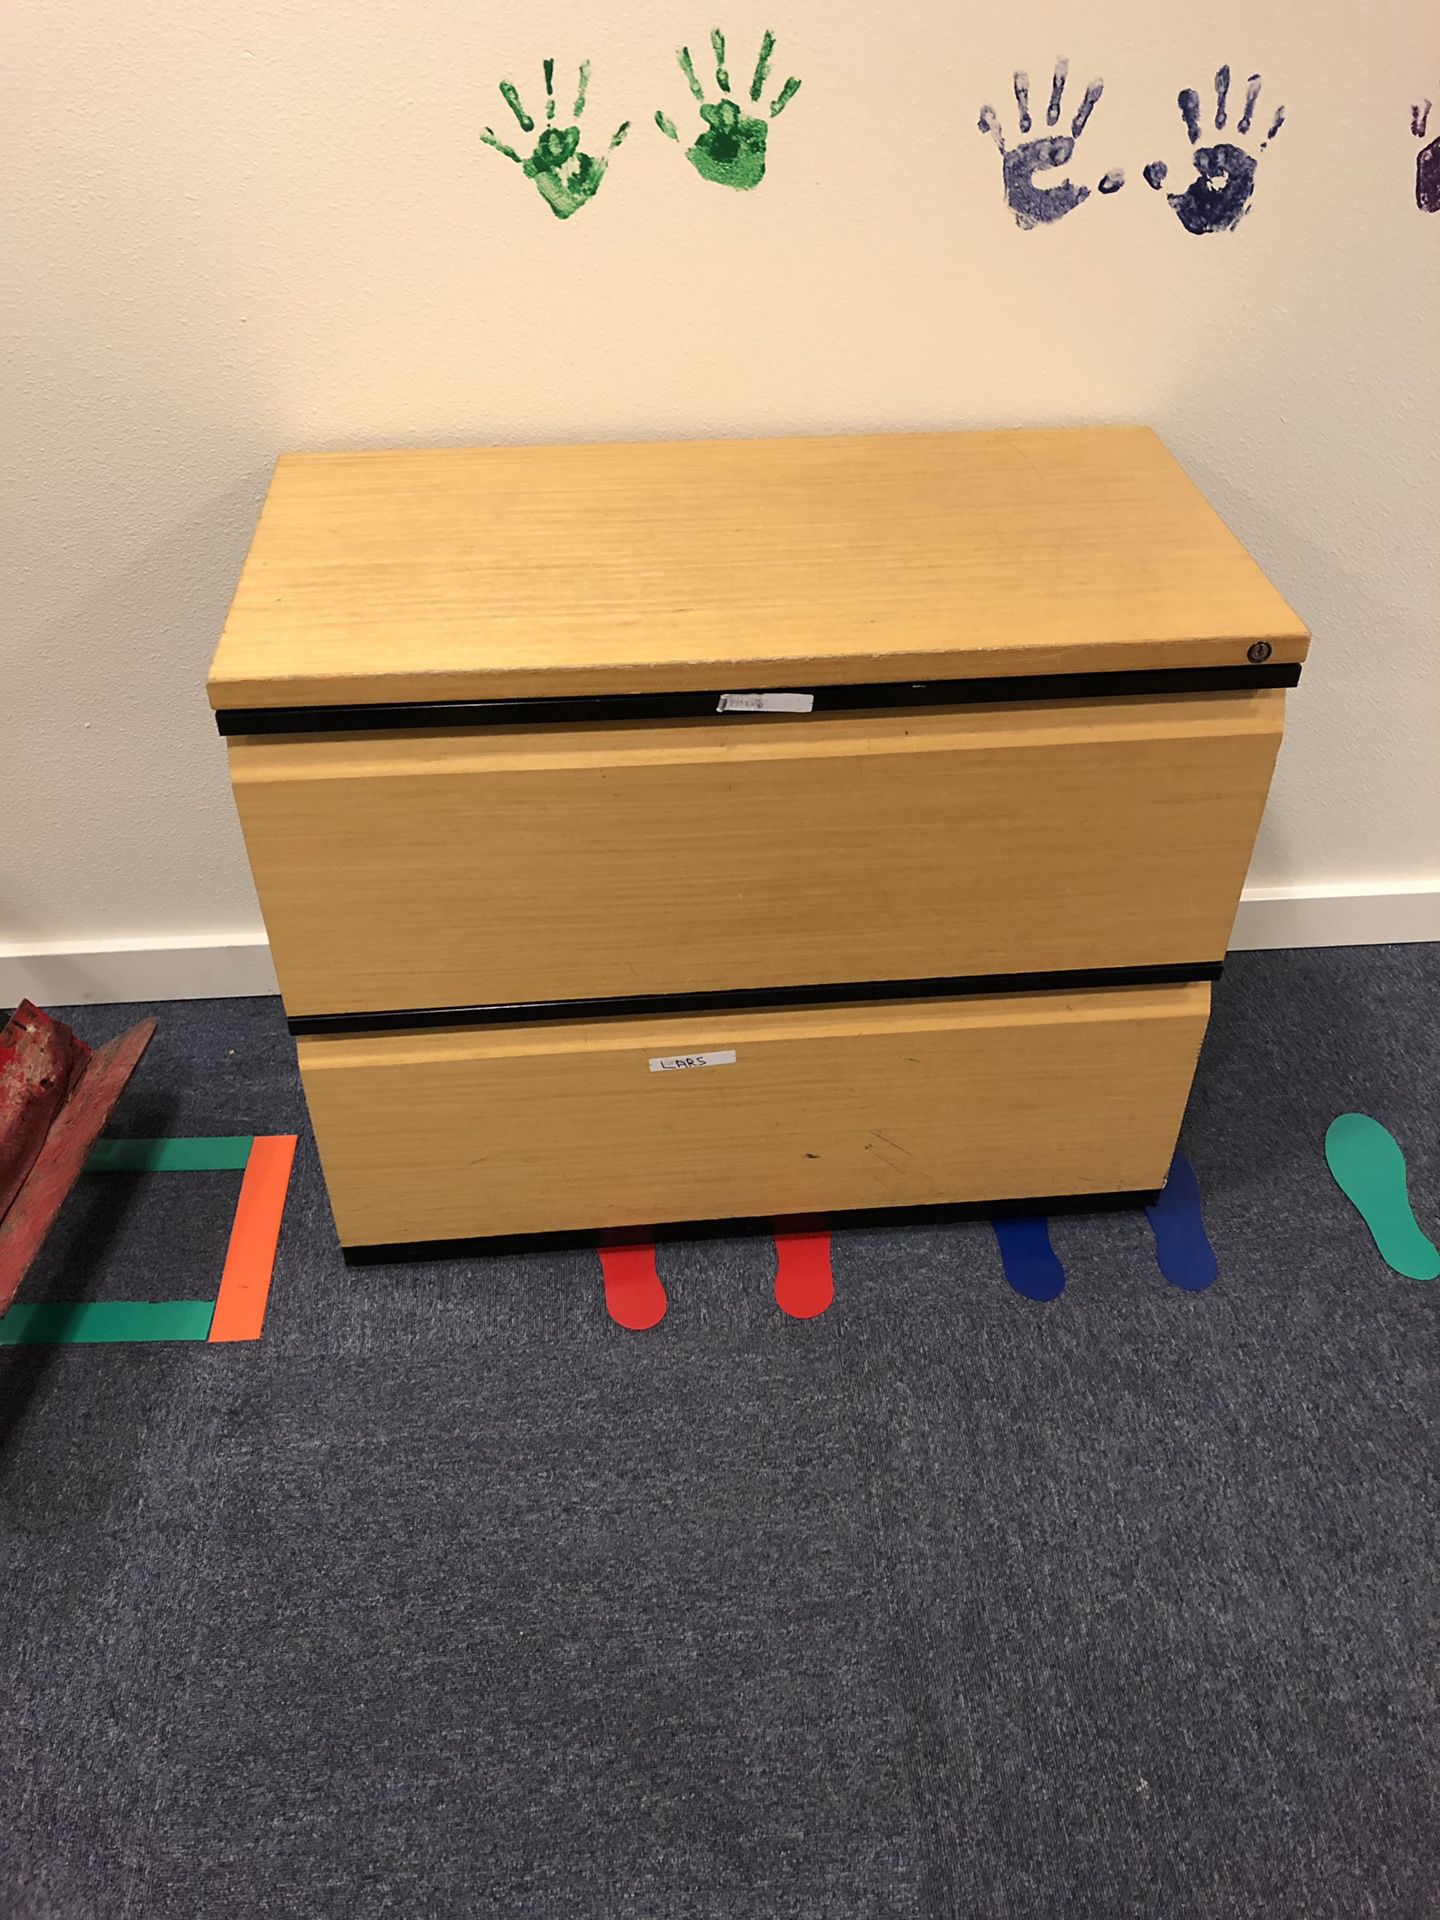 Two drawer filing cabinet wooden front and top